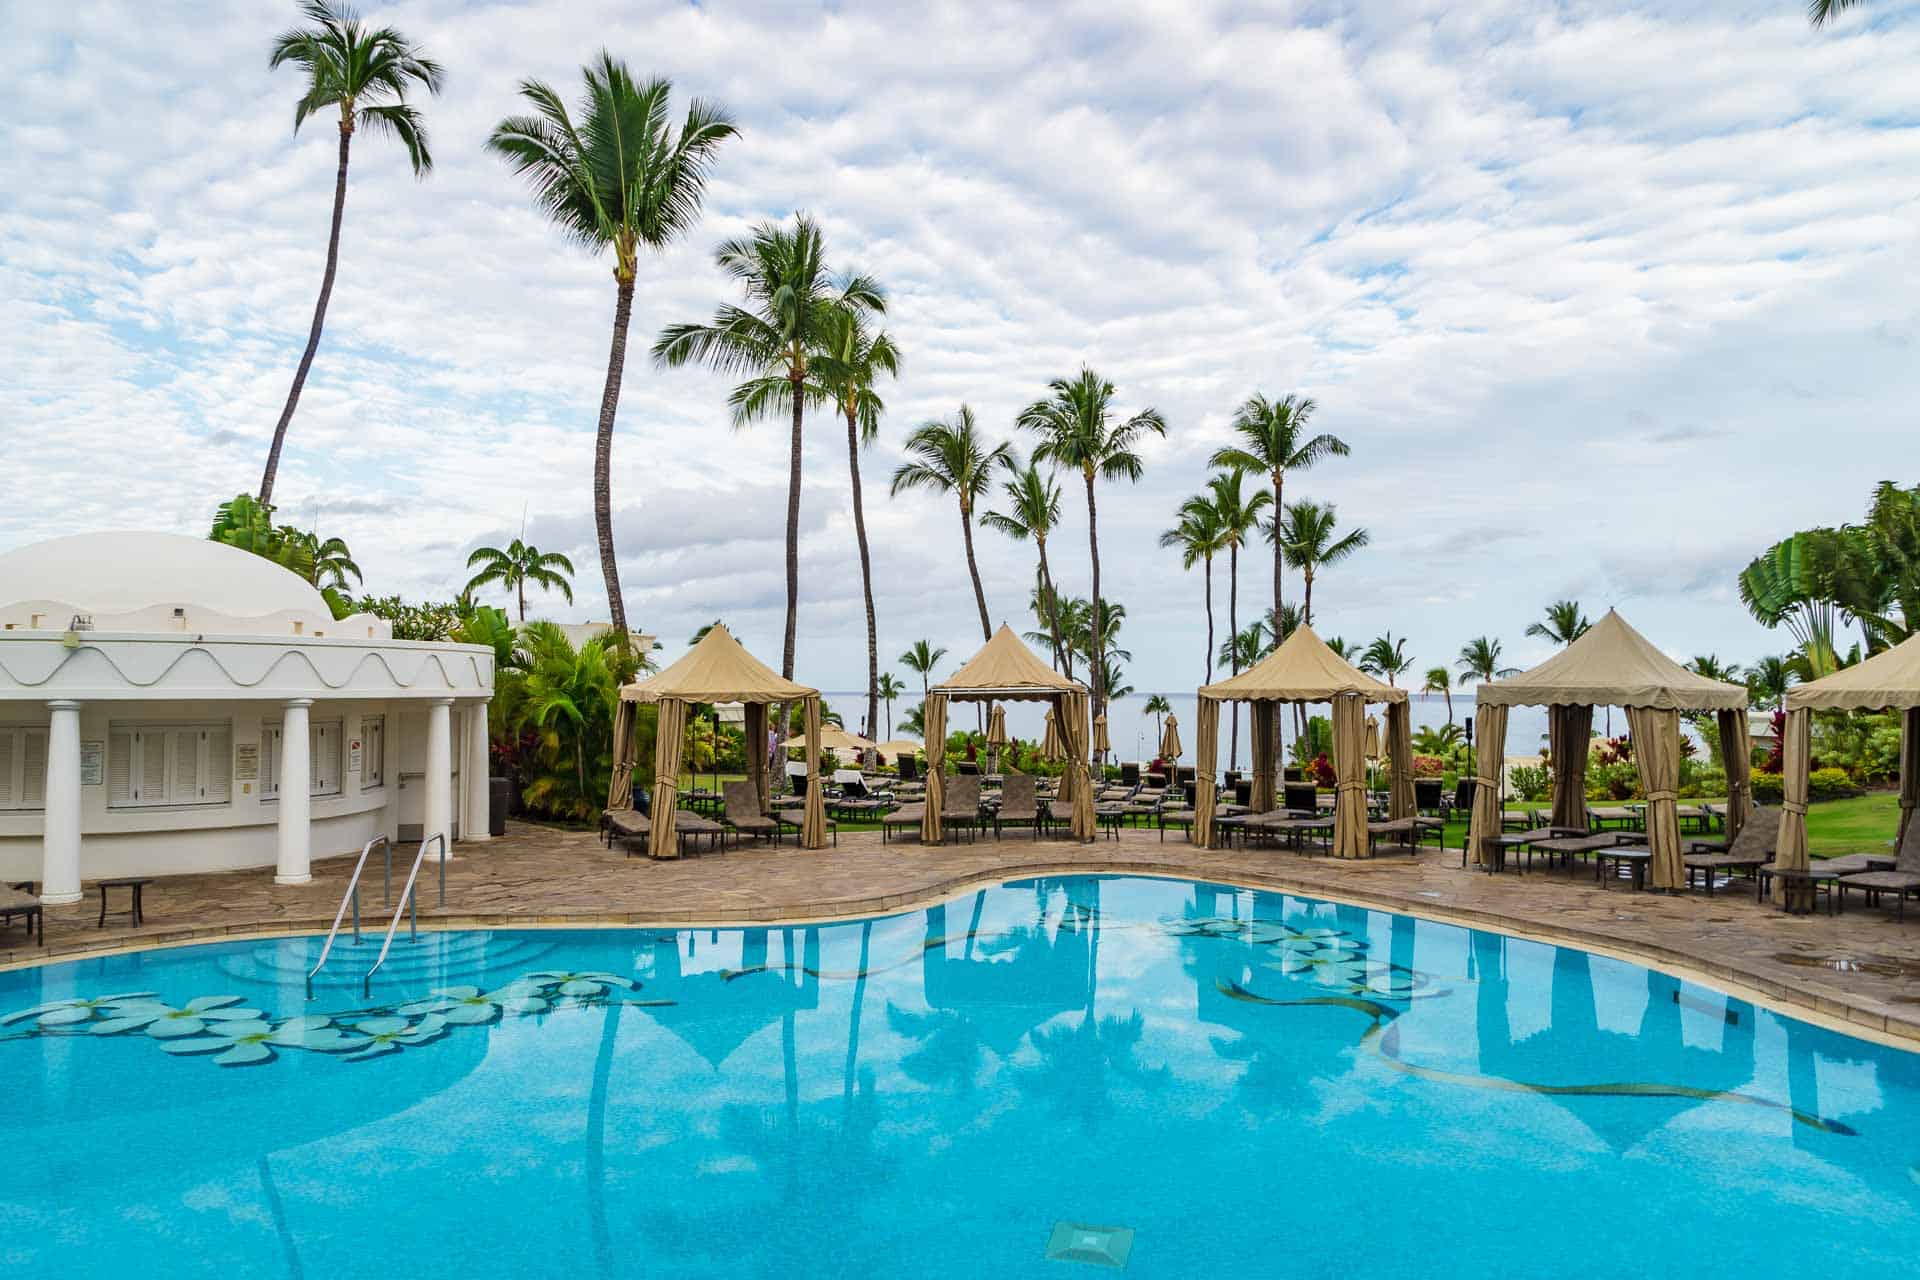 Places to stay in Maui Luxury